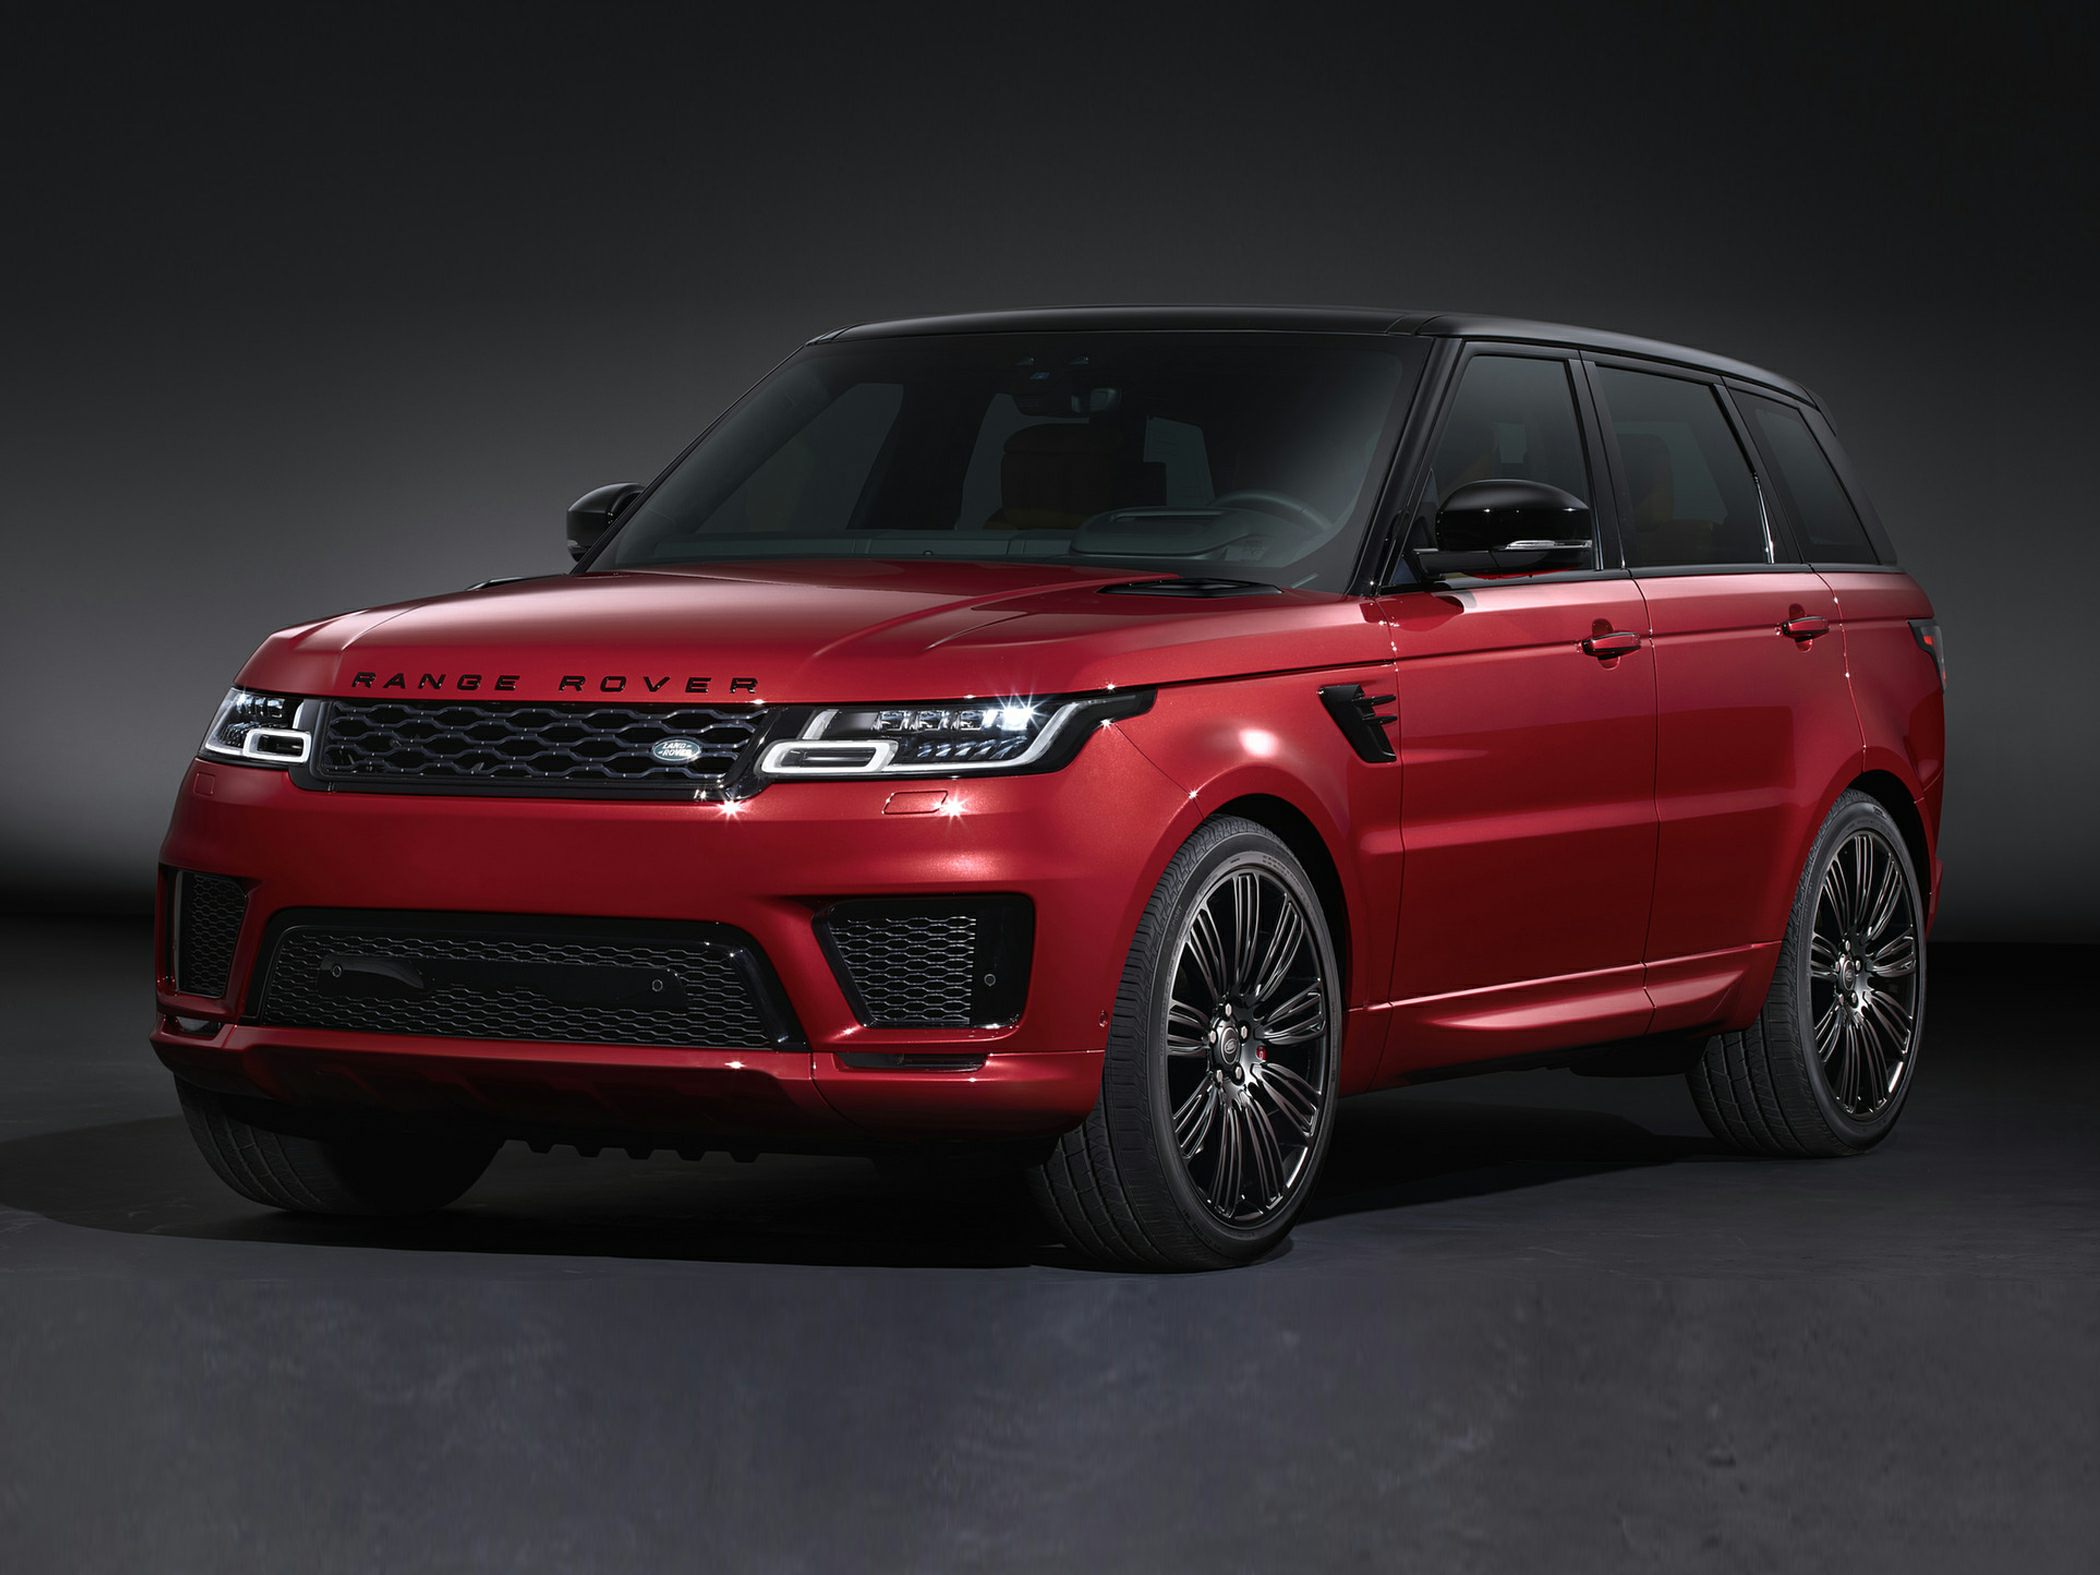 Range Rover Sport Hse Mhev  : The Hst Model Is The Most Powerful In The Range Rover Sport Mhev Segment, While The Se And Hse Offer 355 Horsepower Instead Of 395.